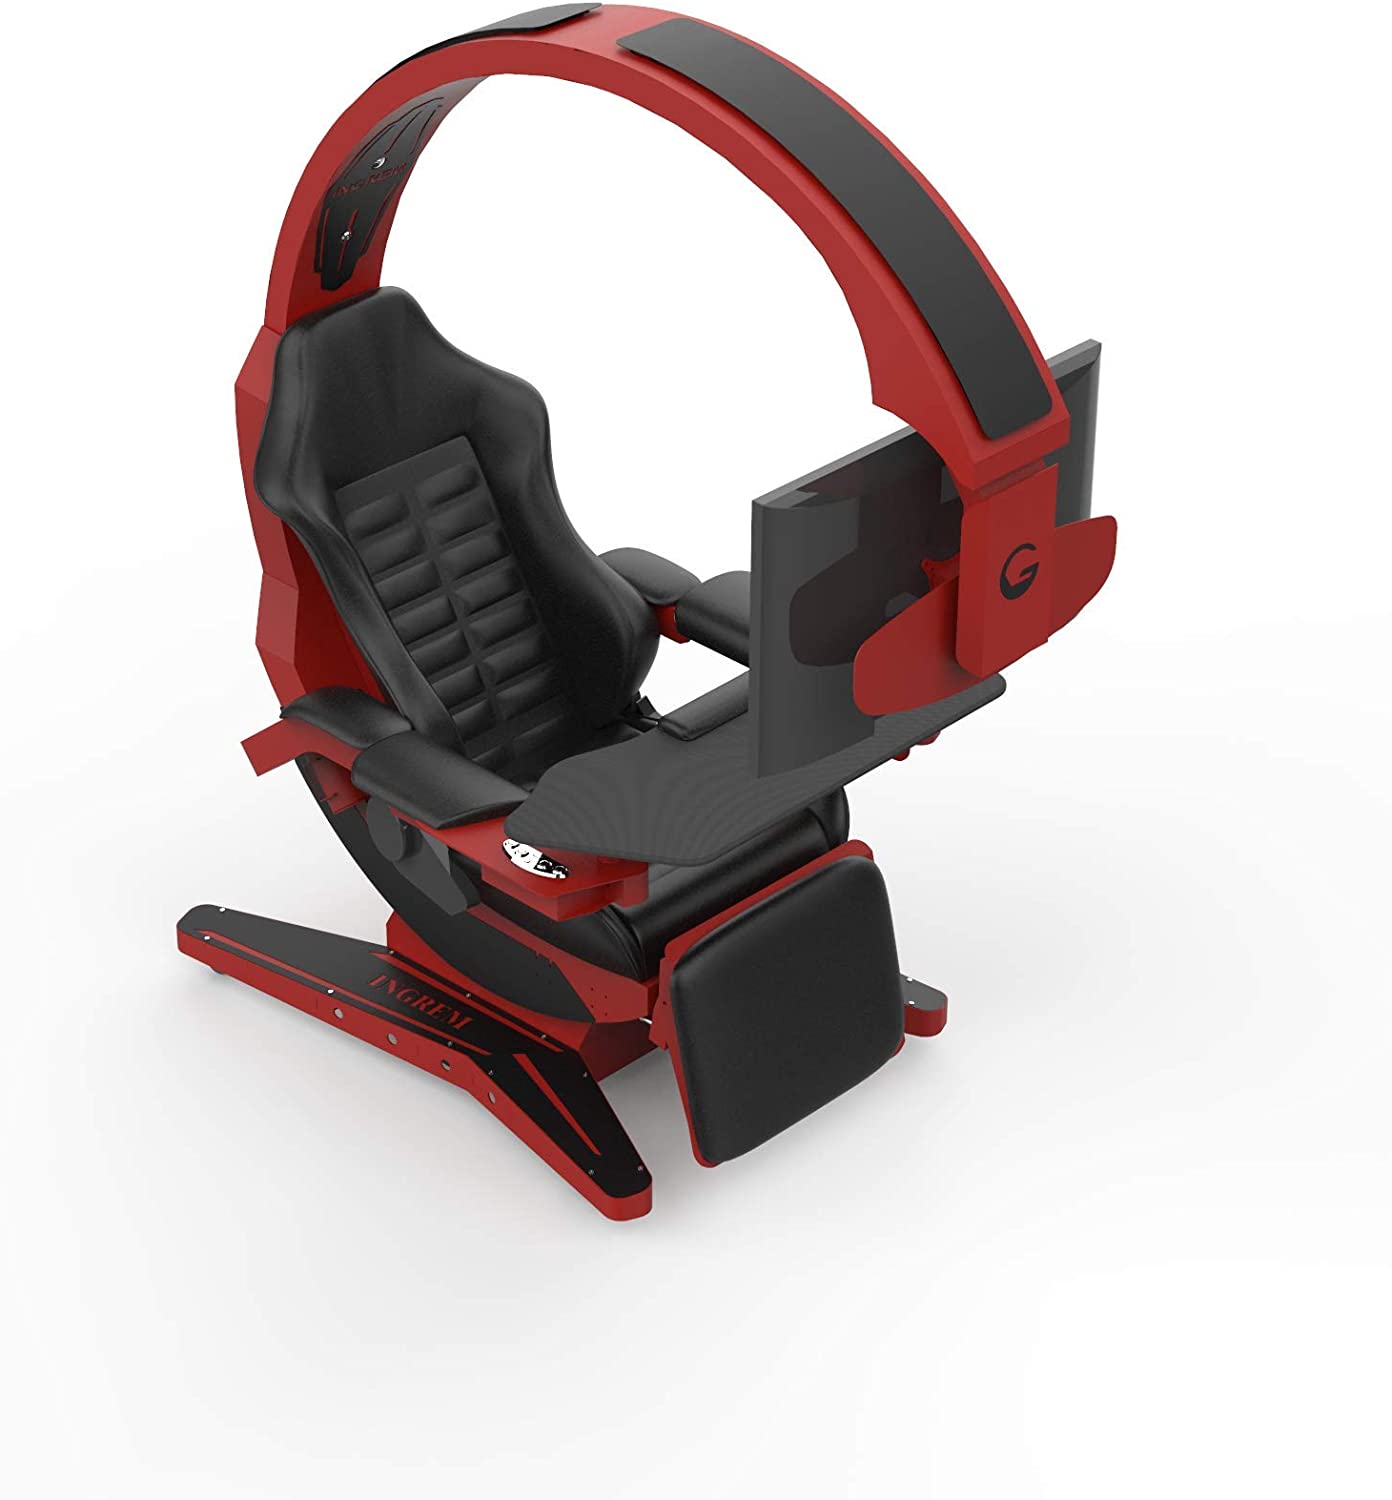 Fly YUTING Gaming Chair, Ergonomic Computer Cockpit Chair with Led Lights,  Comfortable Racing Simulator Cockpit Game Chair with Hanging 3 Screens,Red  in Dubai - UAE